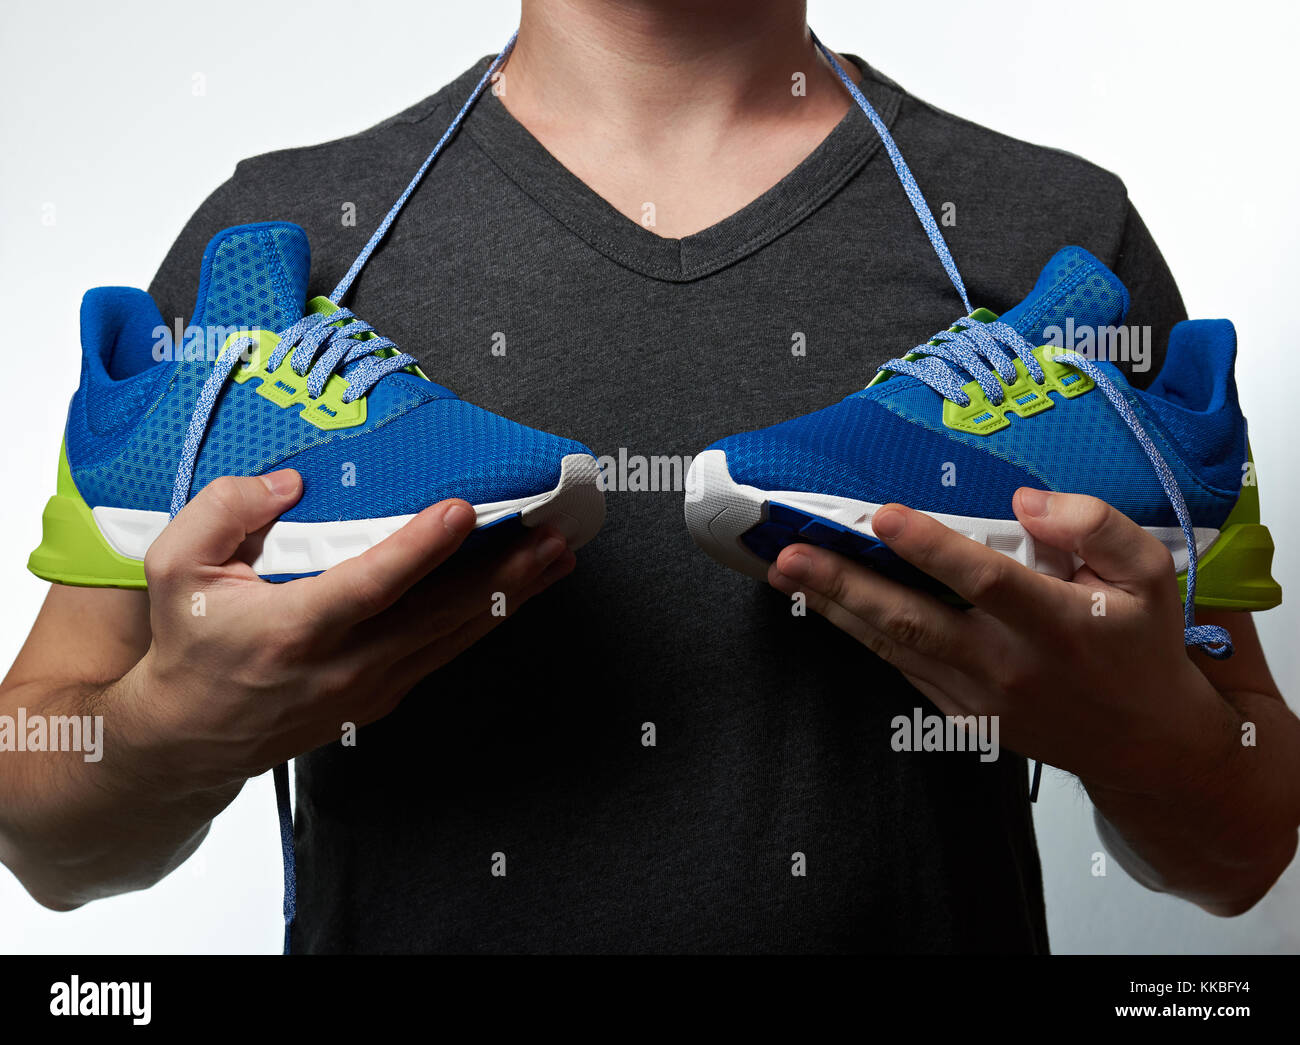 Man holding modern running shoes concept isolated on white background. Man with sporty colorful shoes Stock Photo